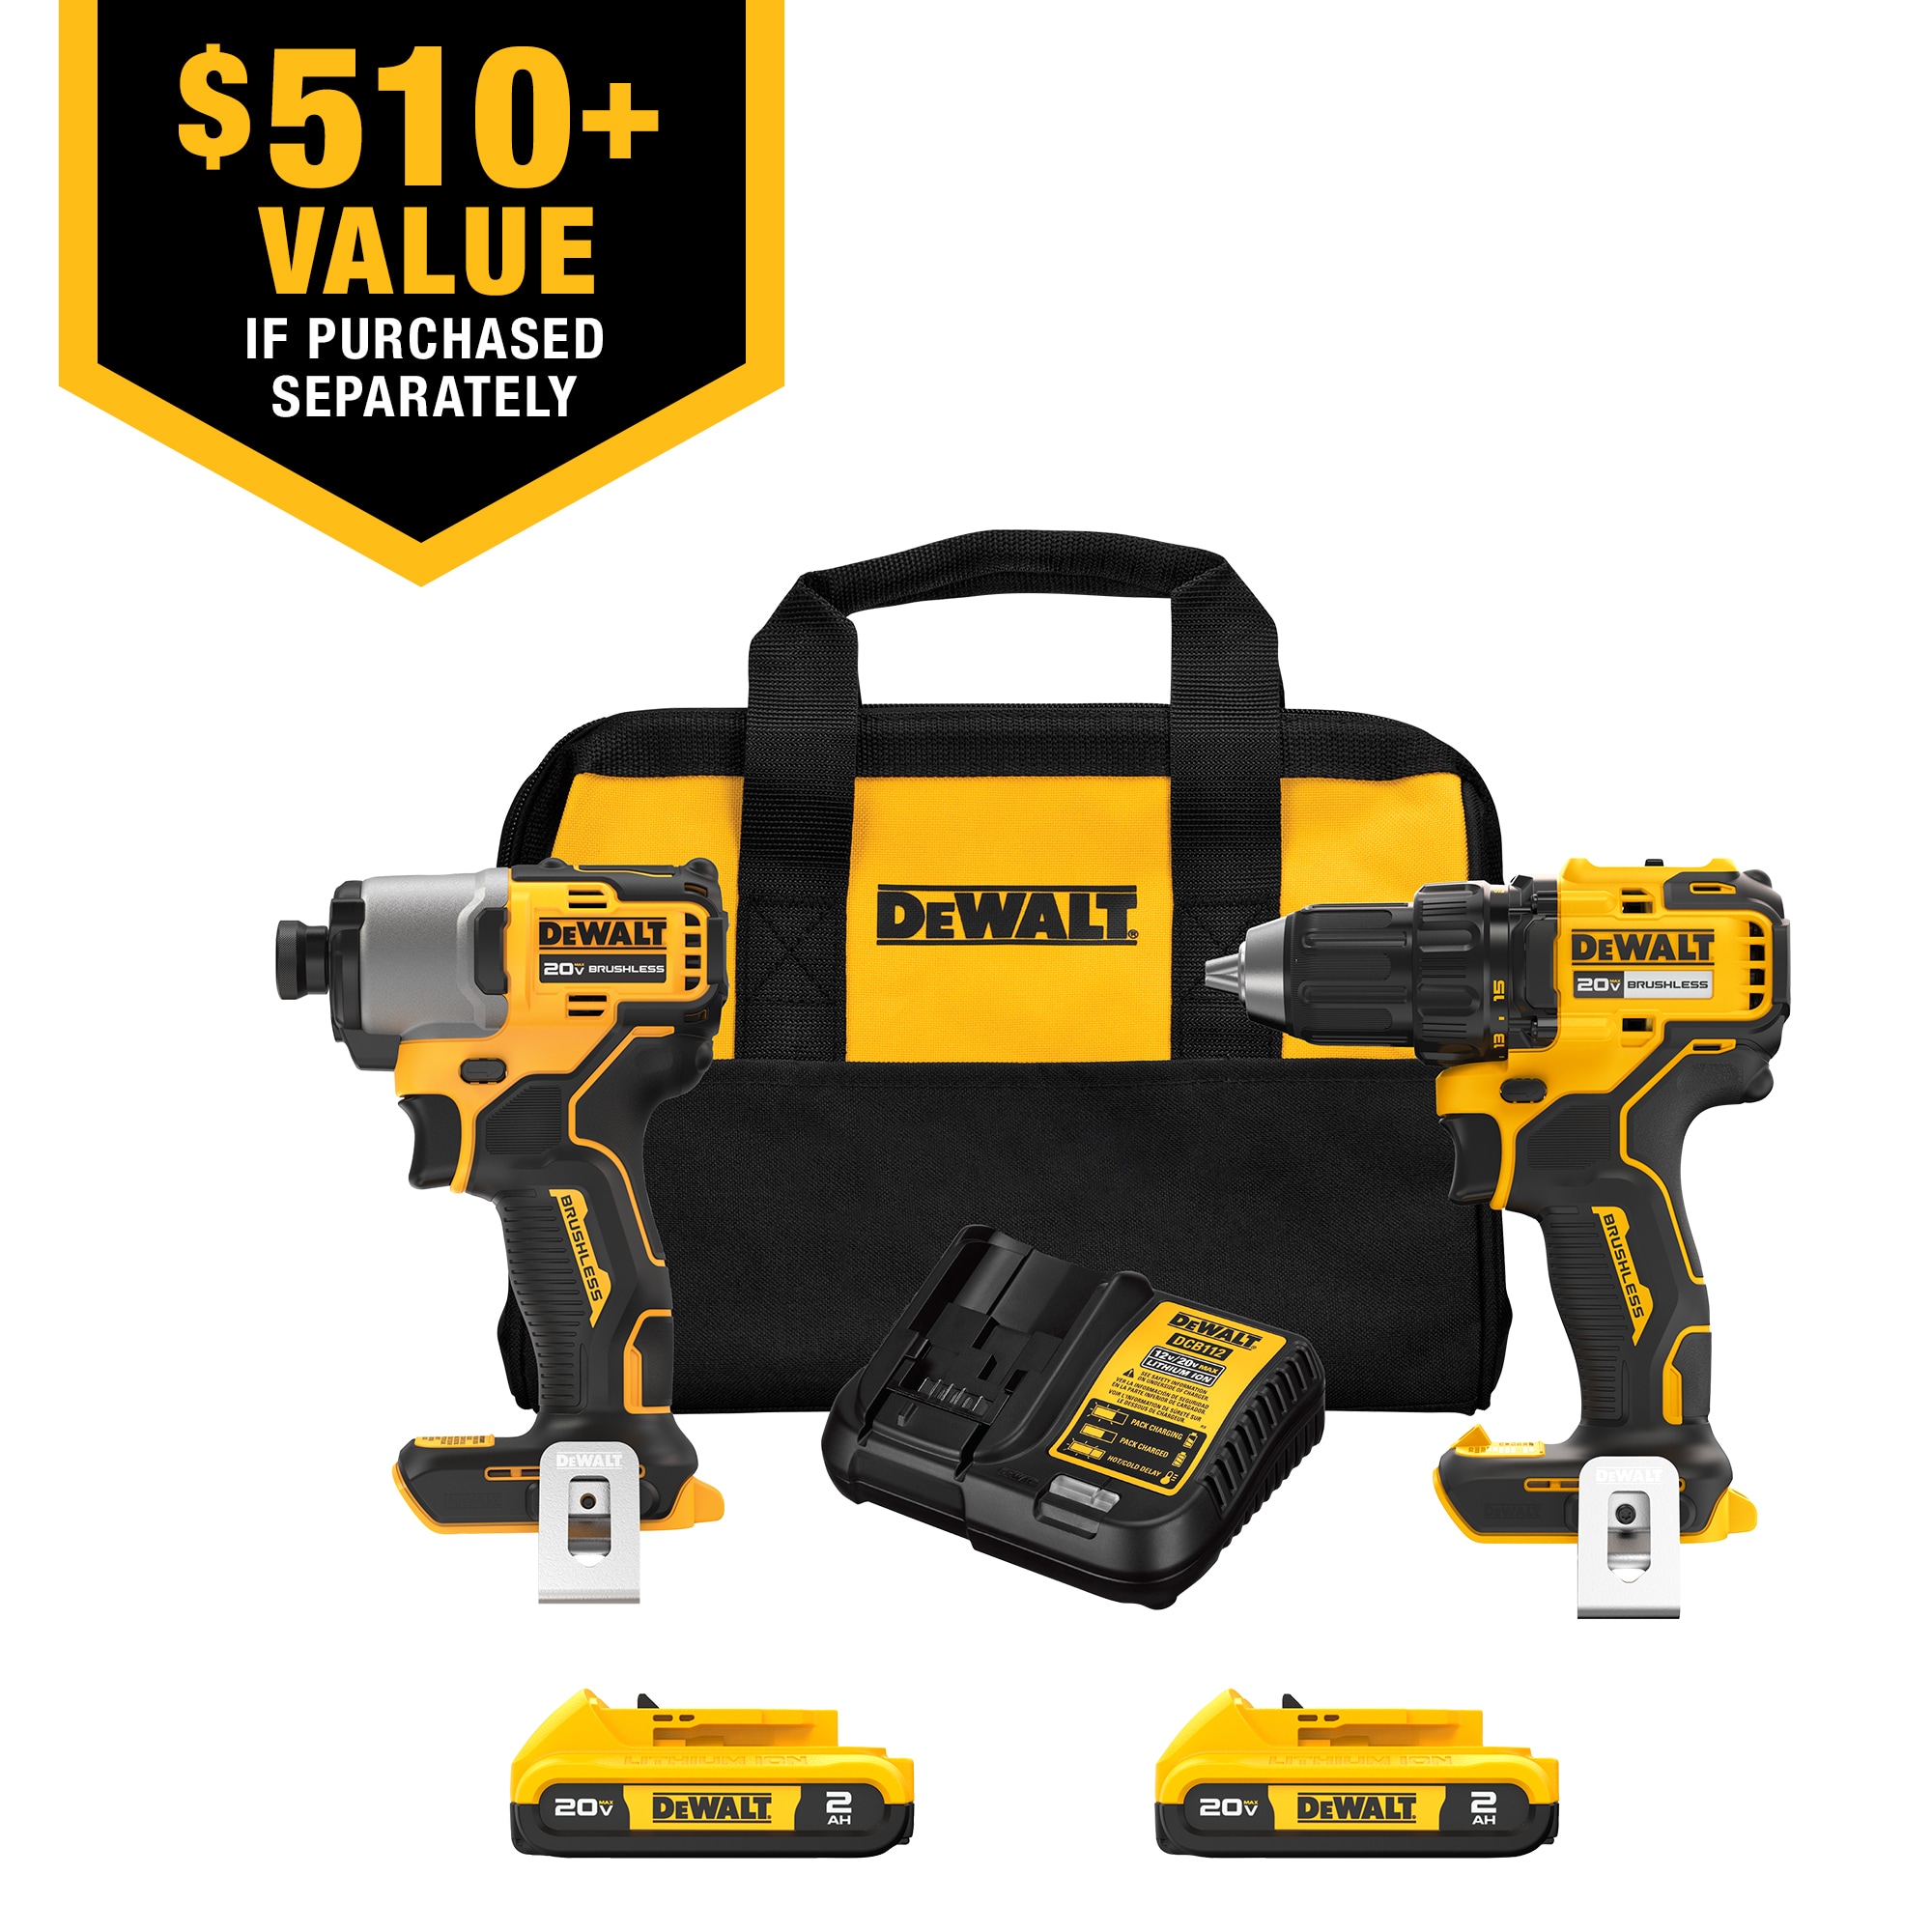 SKIL Power Tool Combo Kits at Lowes.com